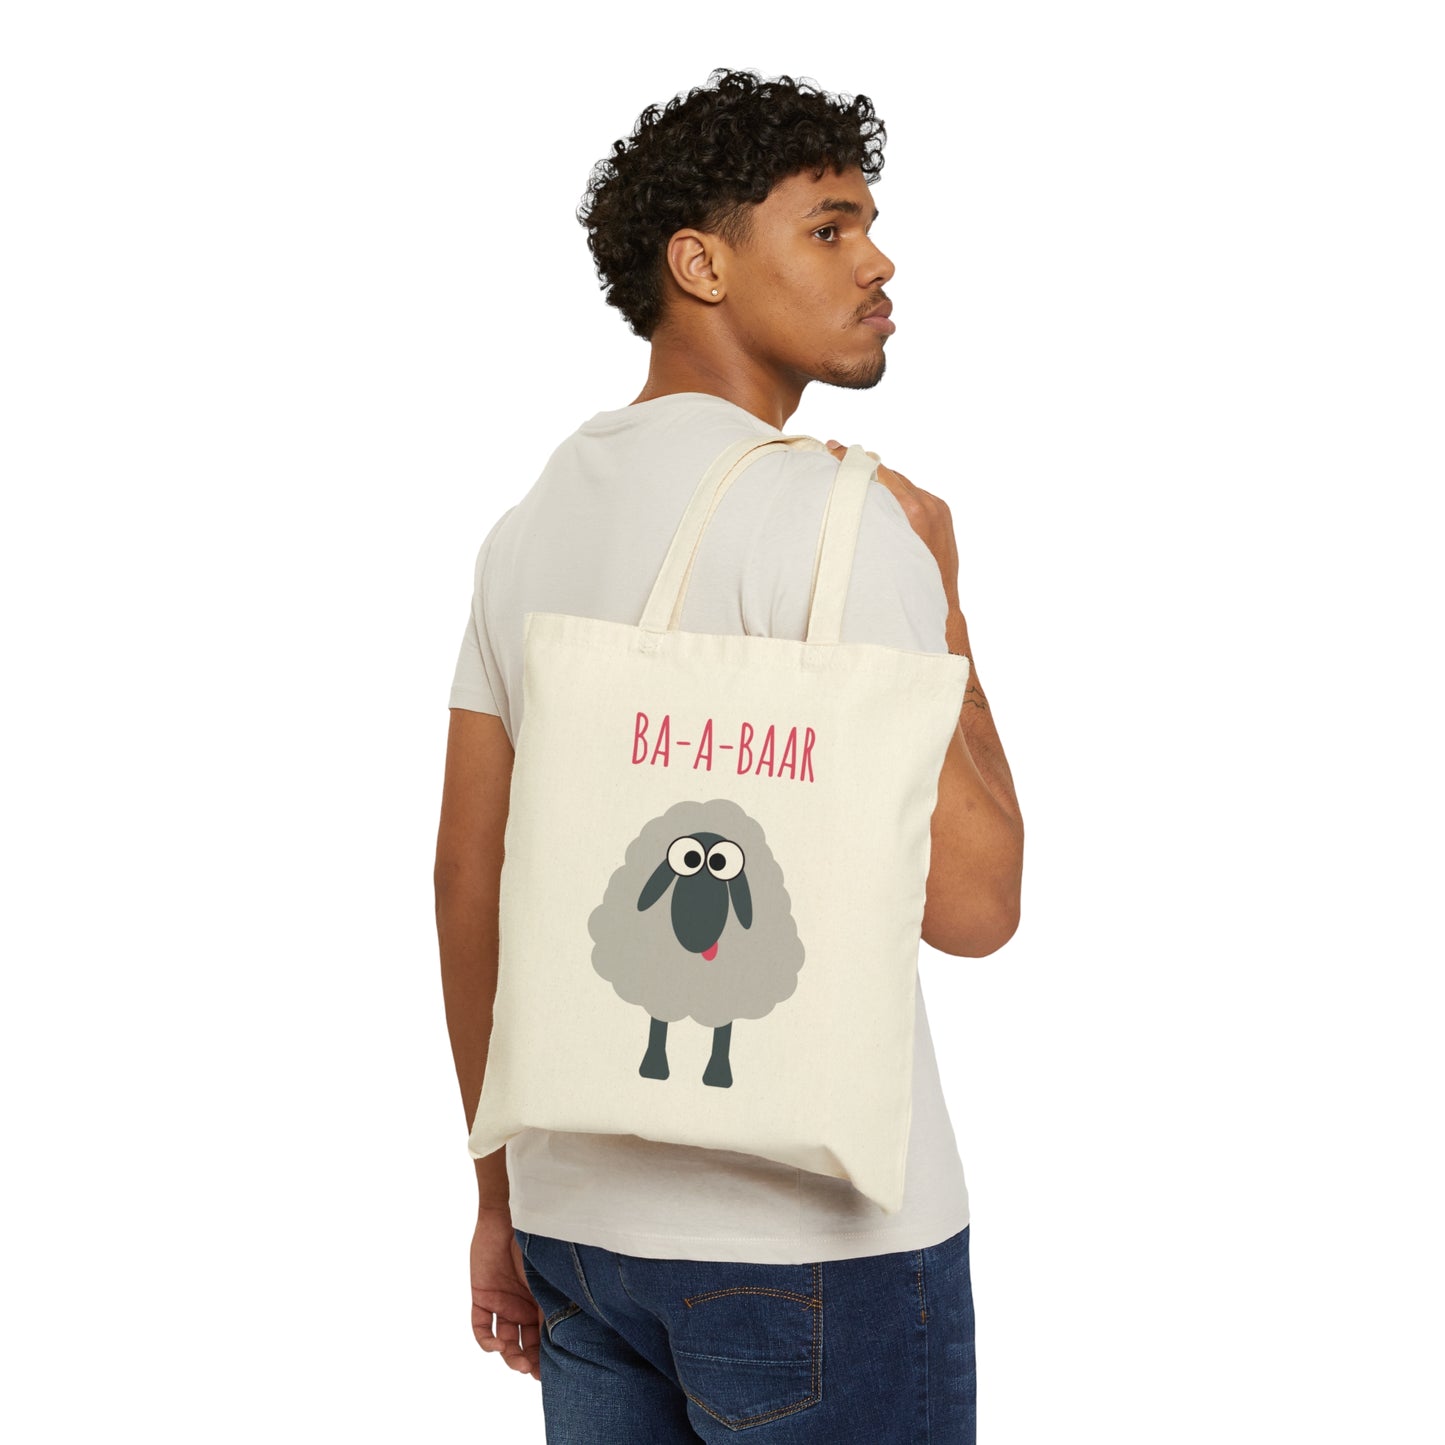 Party Holiday Sheep Bar Alcohol Lovers Canvas Shopping Cotton Tote Bag